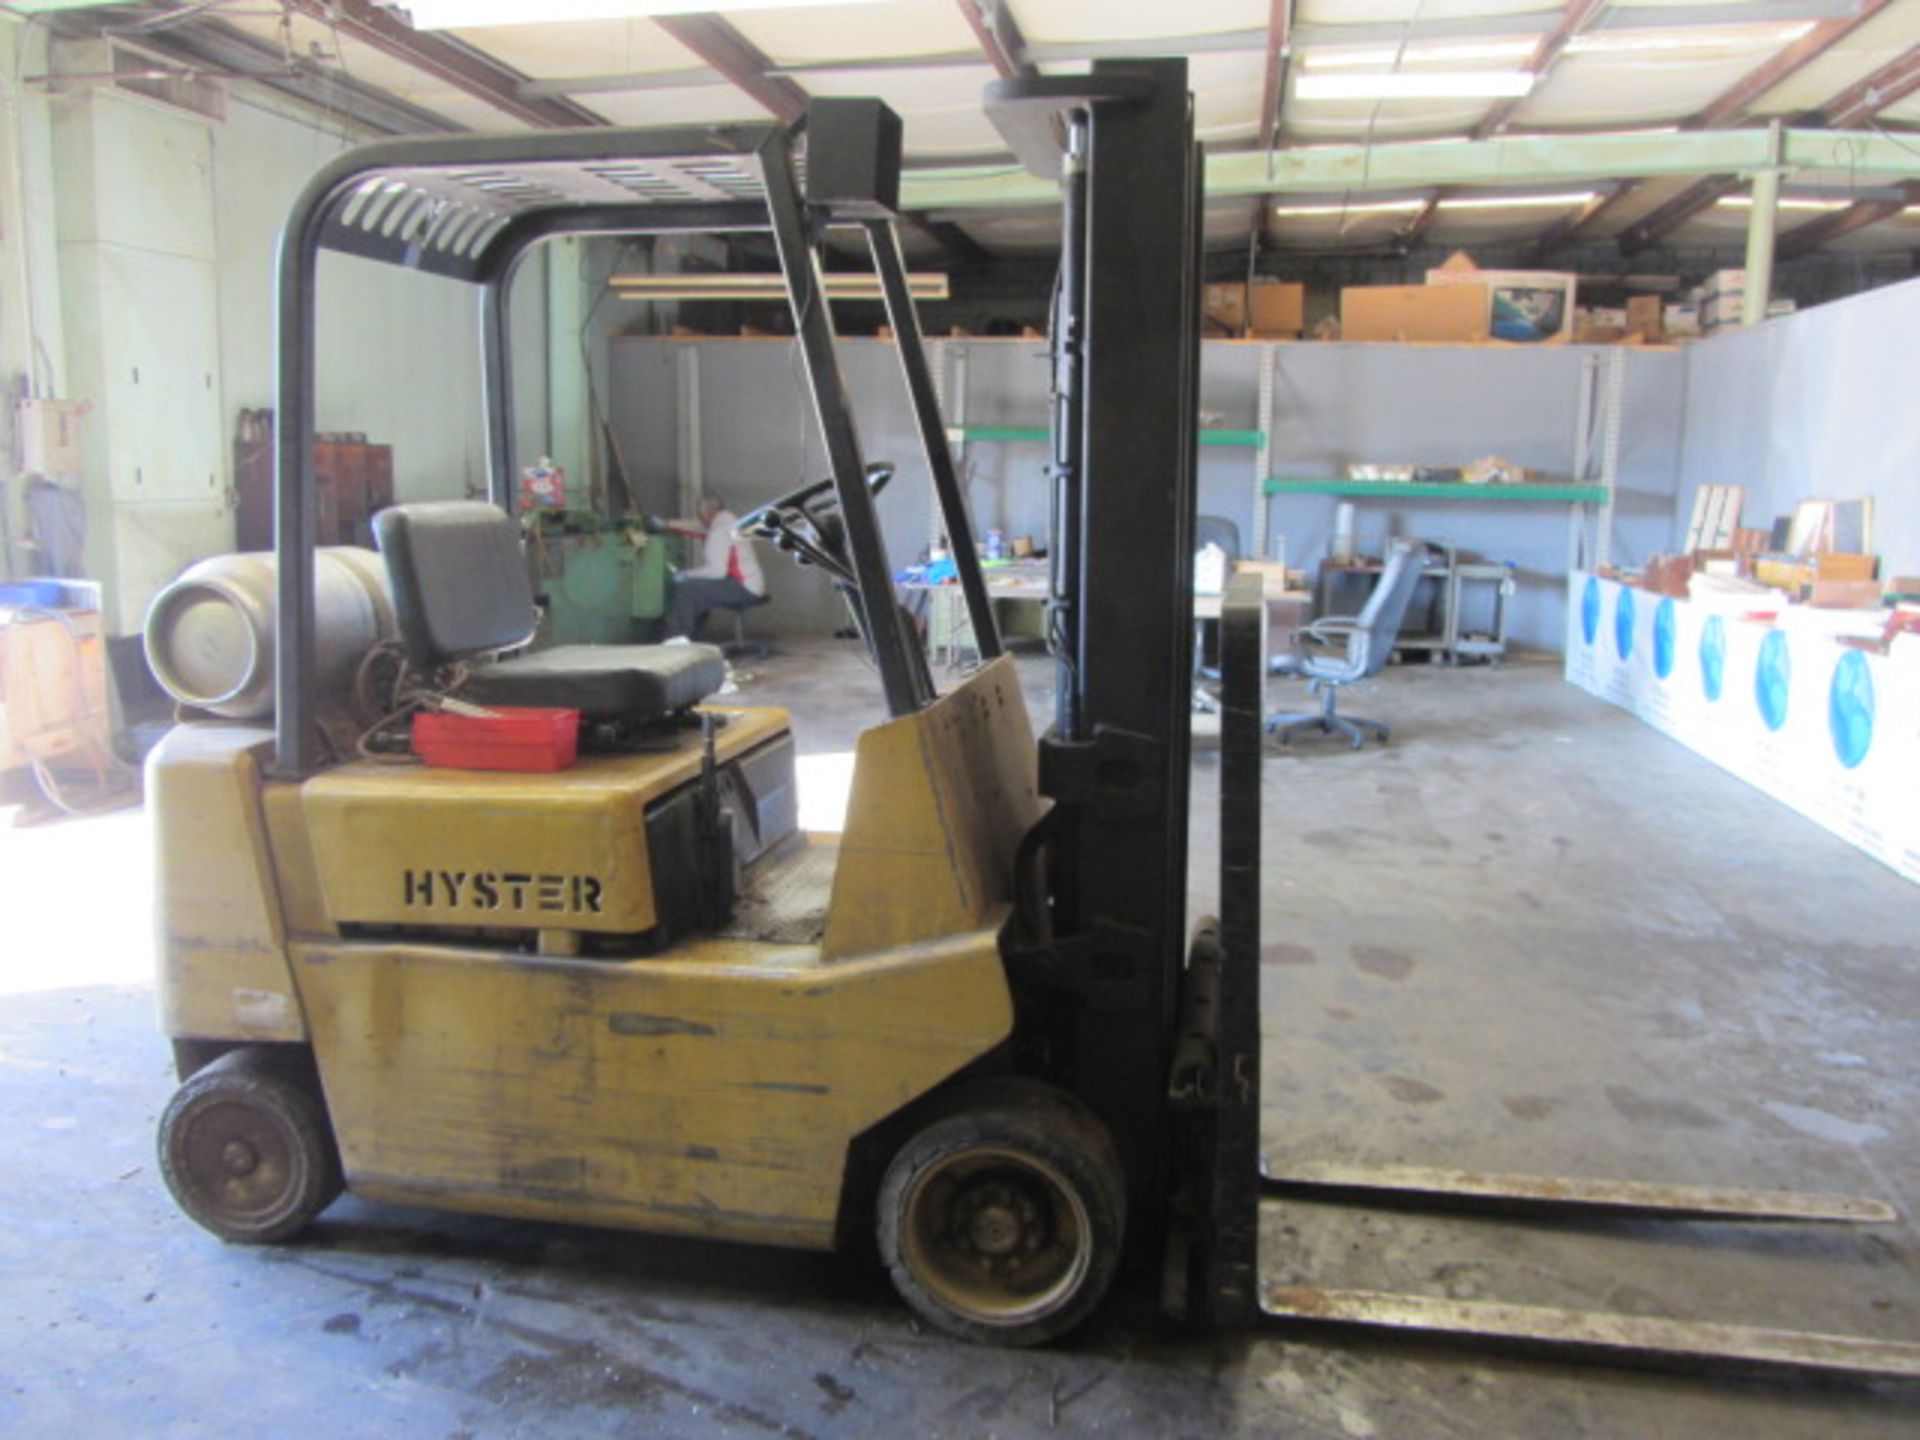 Hyster Model S40XL 4650lb Capacity Propane Forklift with 4 Hard Tires, 48'' Forks, 2-Stage Mast, - Image 2 of 6